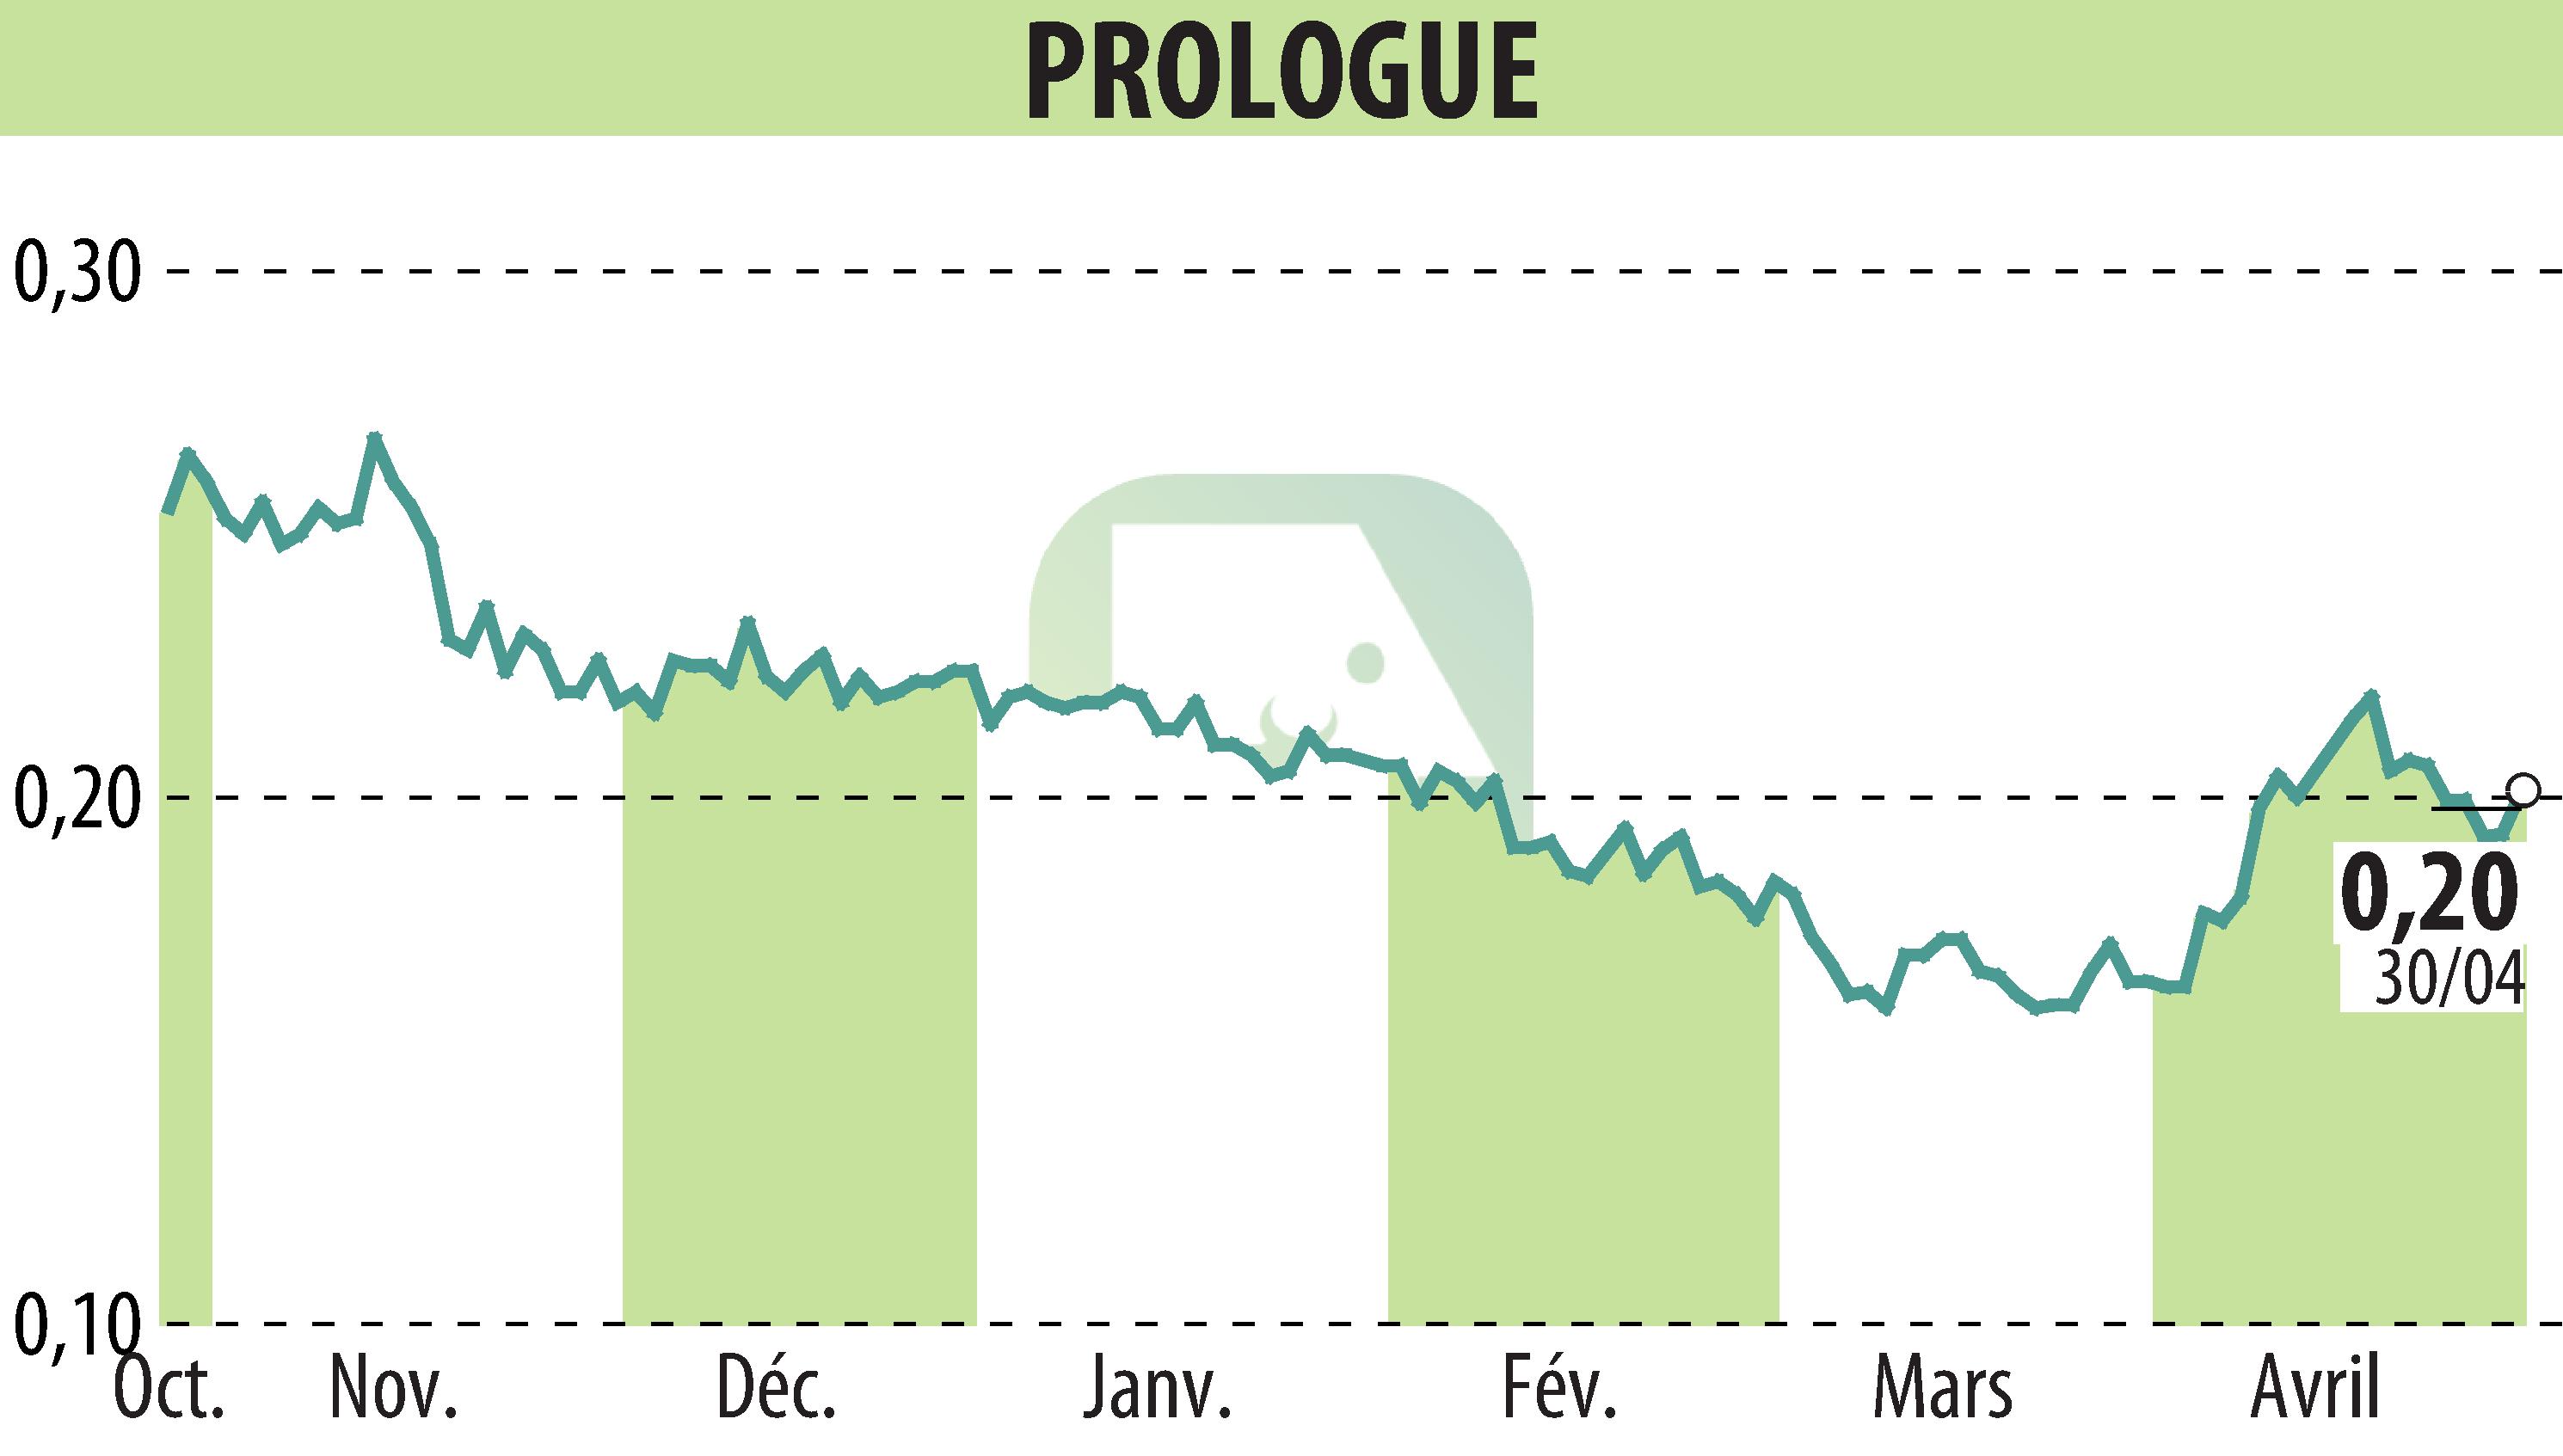 Stock price chart of Prologue (EPA:ALPRG) showing fluctuations.